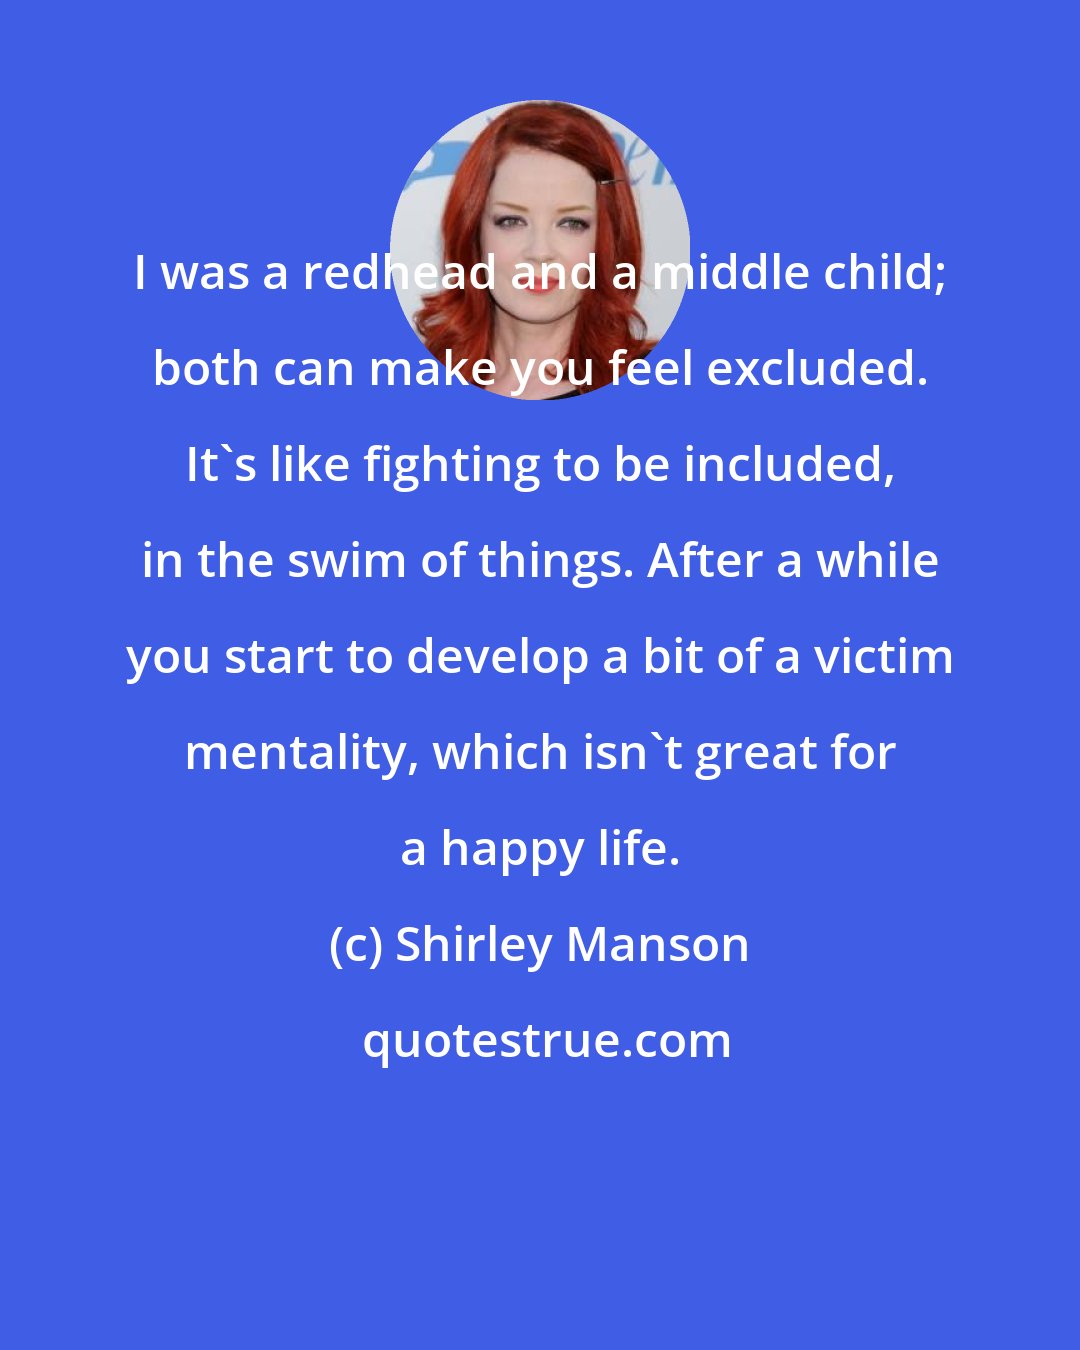 Shirley Manson: I was a redhead and a middle child; both can make you feel excluded. It's like fighting to be included, in the swim of things. After a while you start to develop a bit of a victim mentality, which isn't great for a happy life.